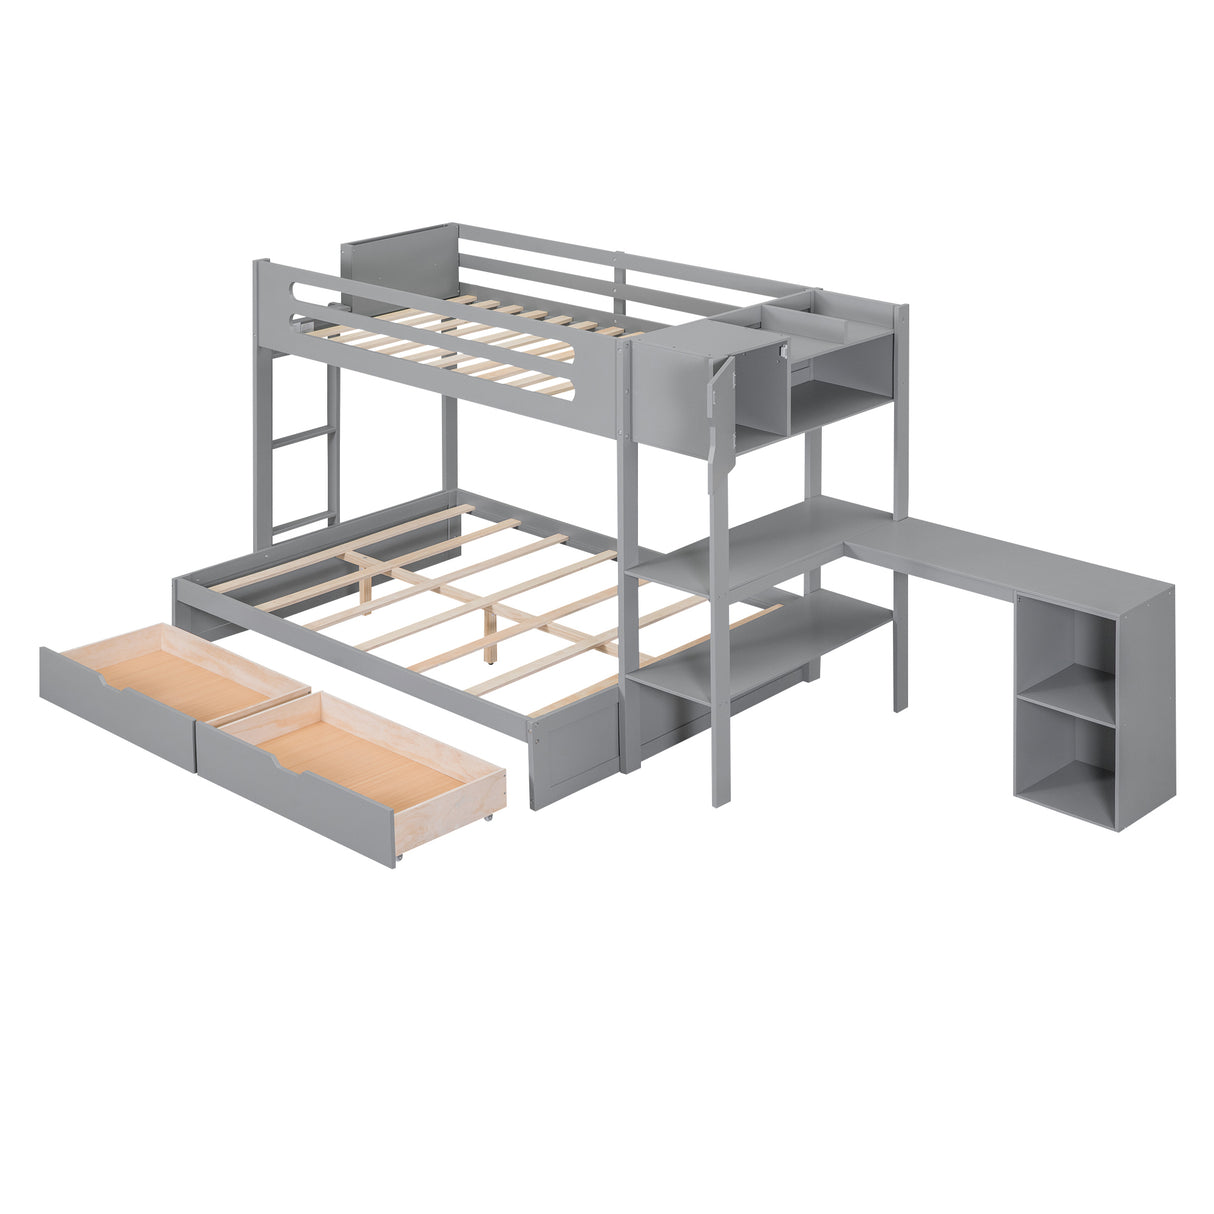 Wood Twin over Full Bunk Bed with Drawers, Shelves, Cabinets, L-shaped Desk and Magazine Holder, Gray - Home Elegance USA